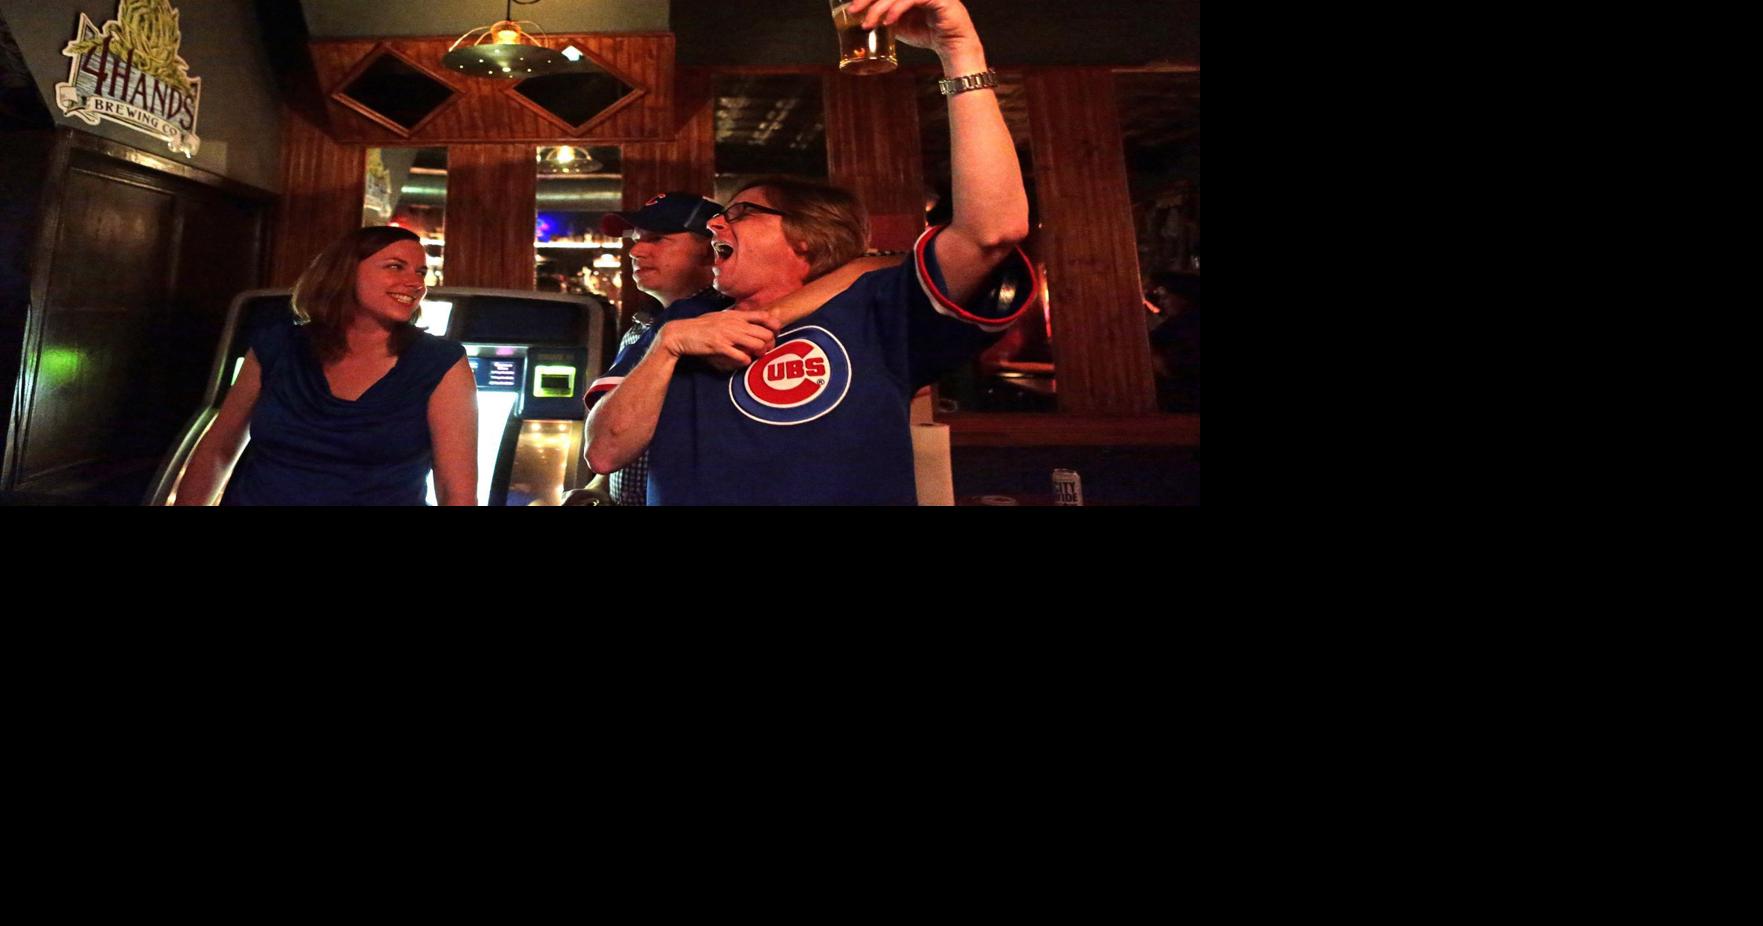 Meet the Cubs fan who built a man cave of hope